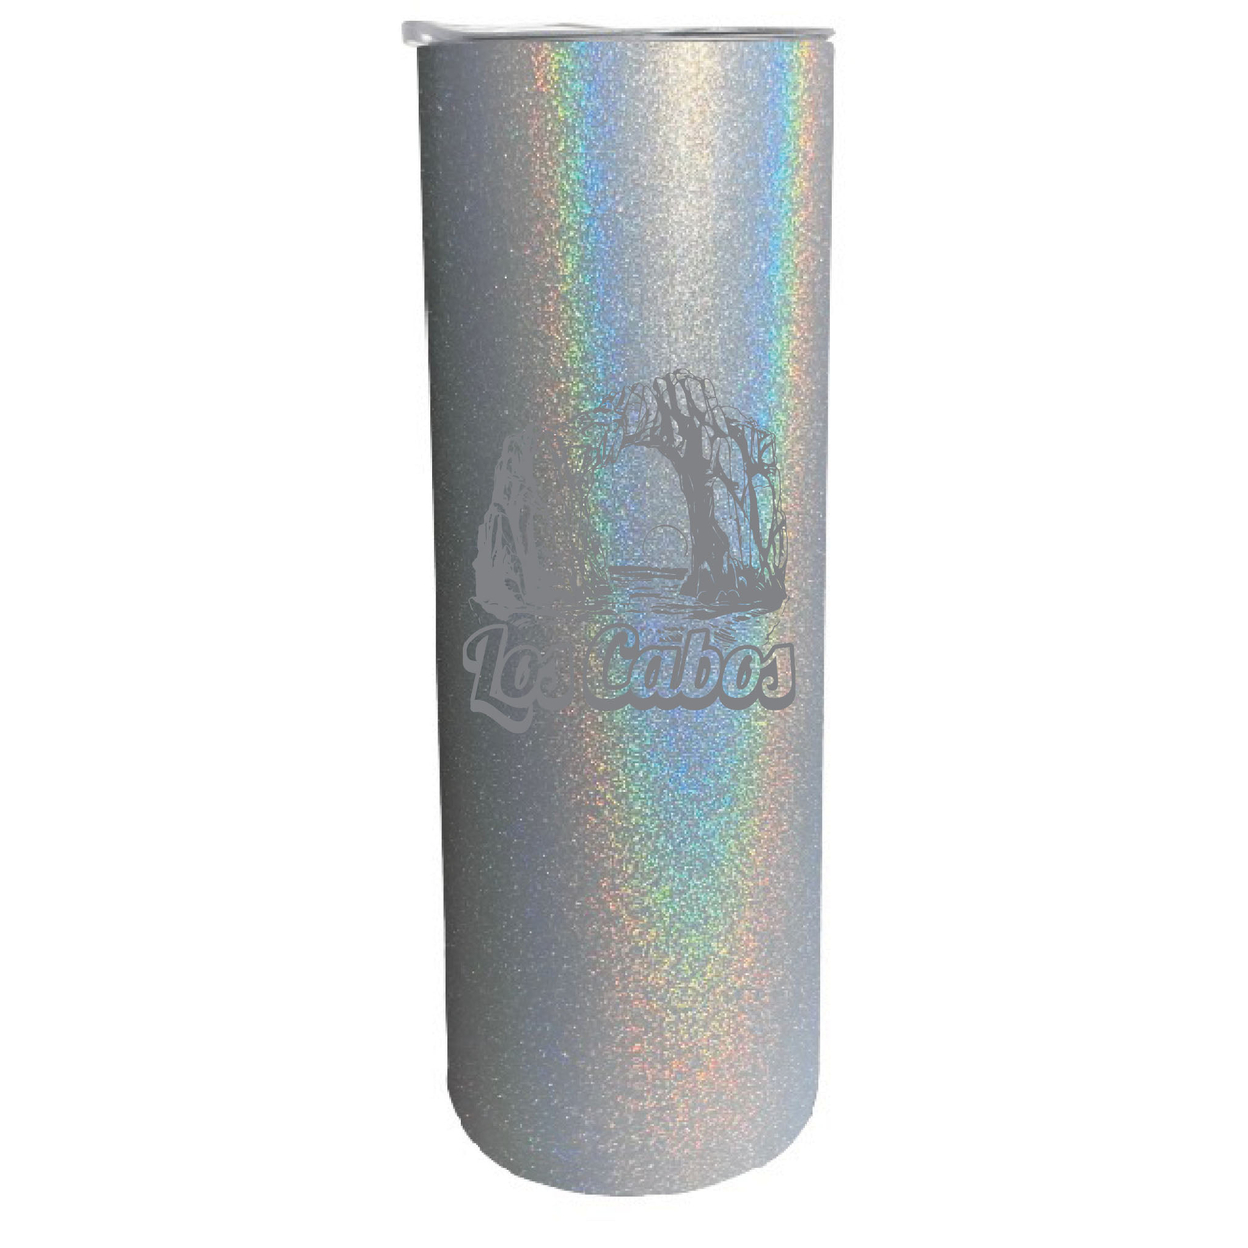 Los Cabos Mexico Souvenir 20 Oz Engraved Insulated Stainless Steel Skinny Tumbler - Gray Glitter,,2-Pack